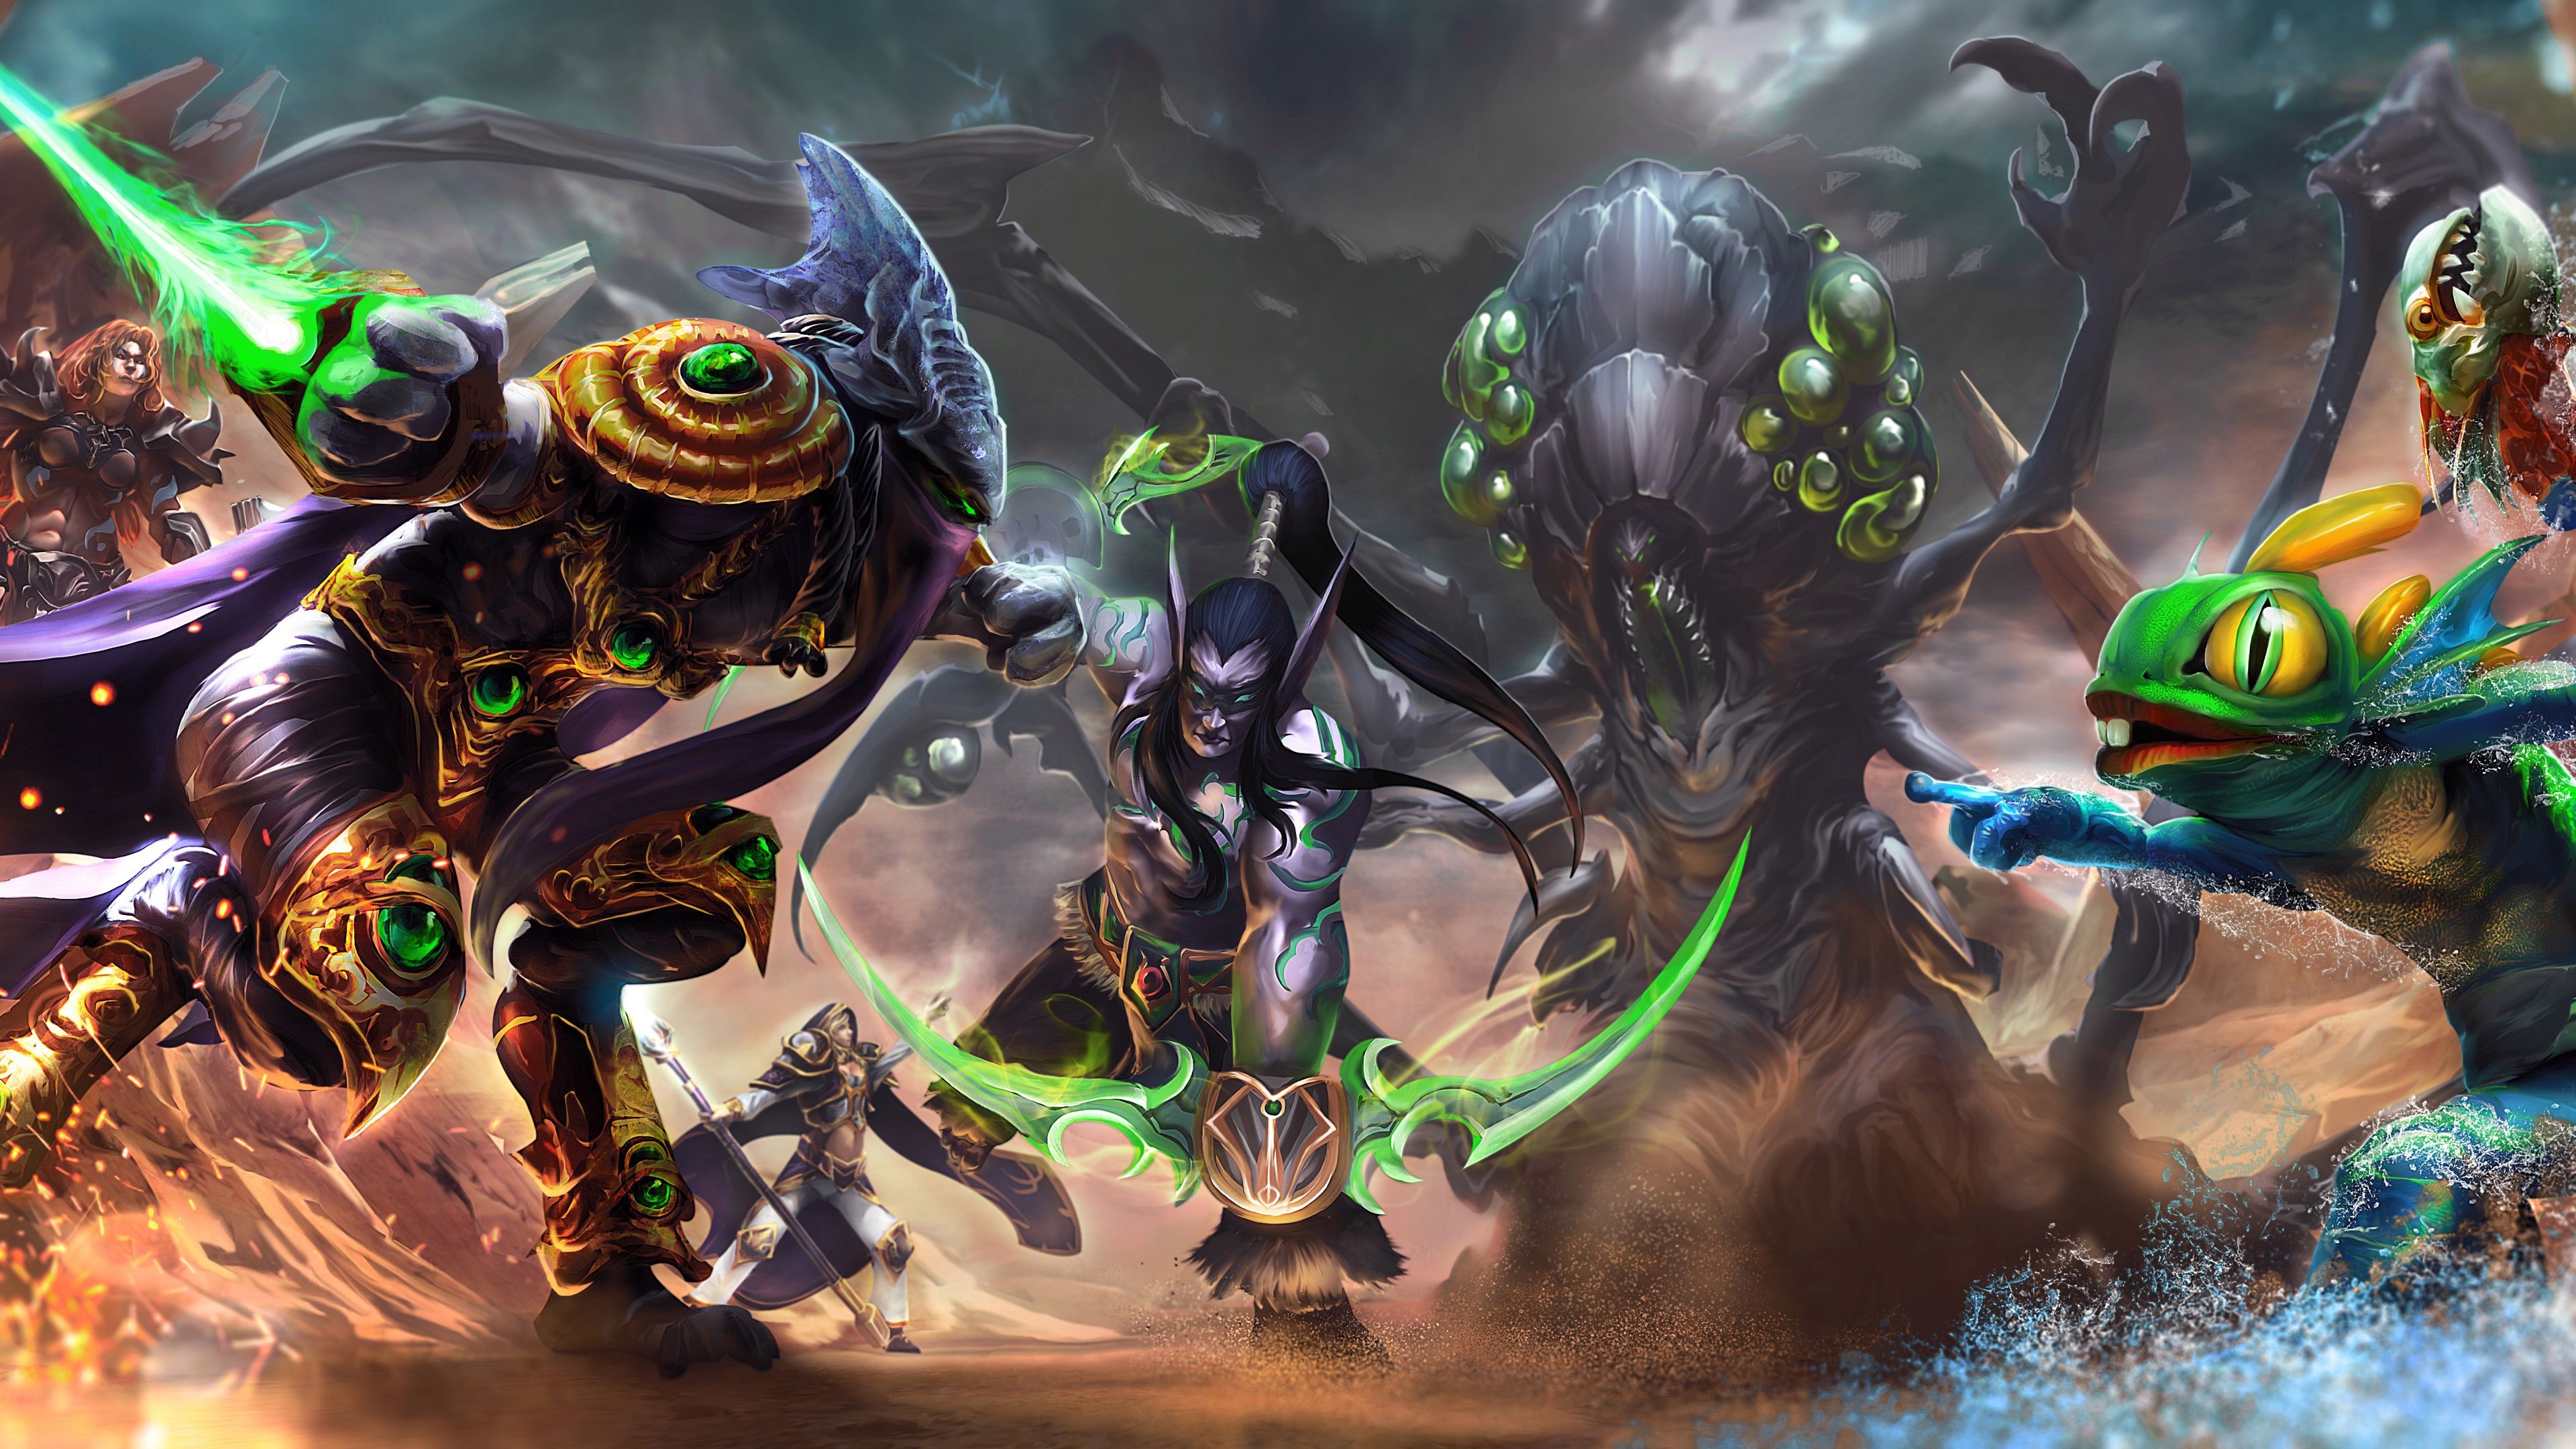 3840x2160 Wallpaper Heroes Of The Storm Art Picture 3840x2160 Uhd 4k